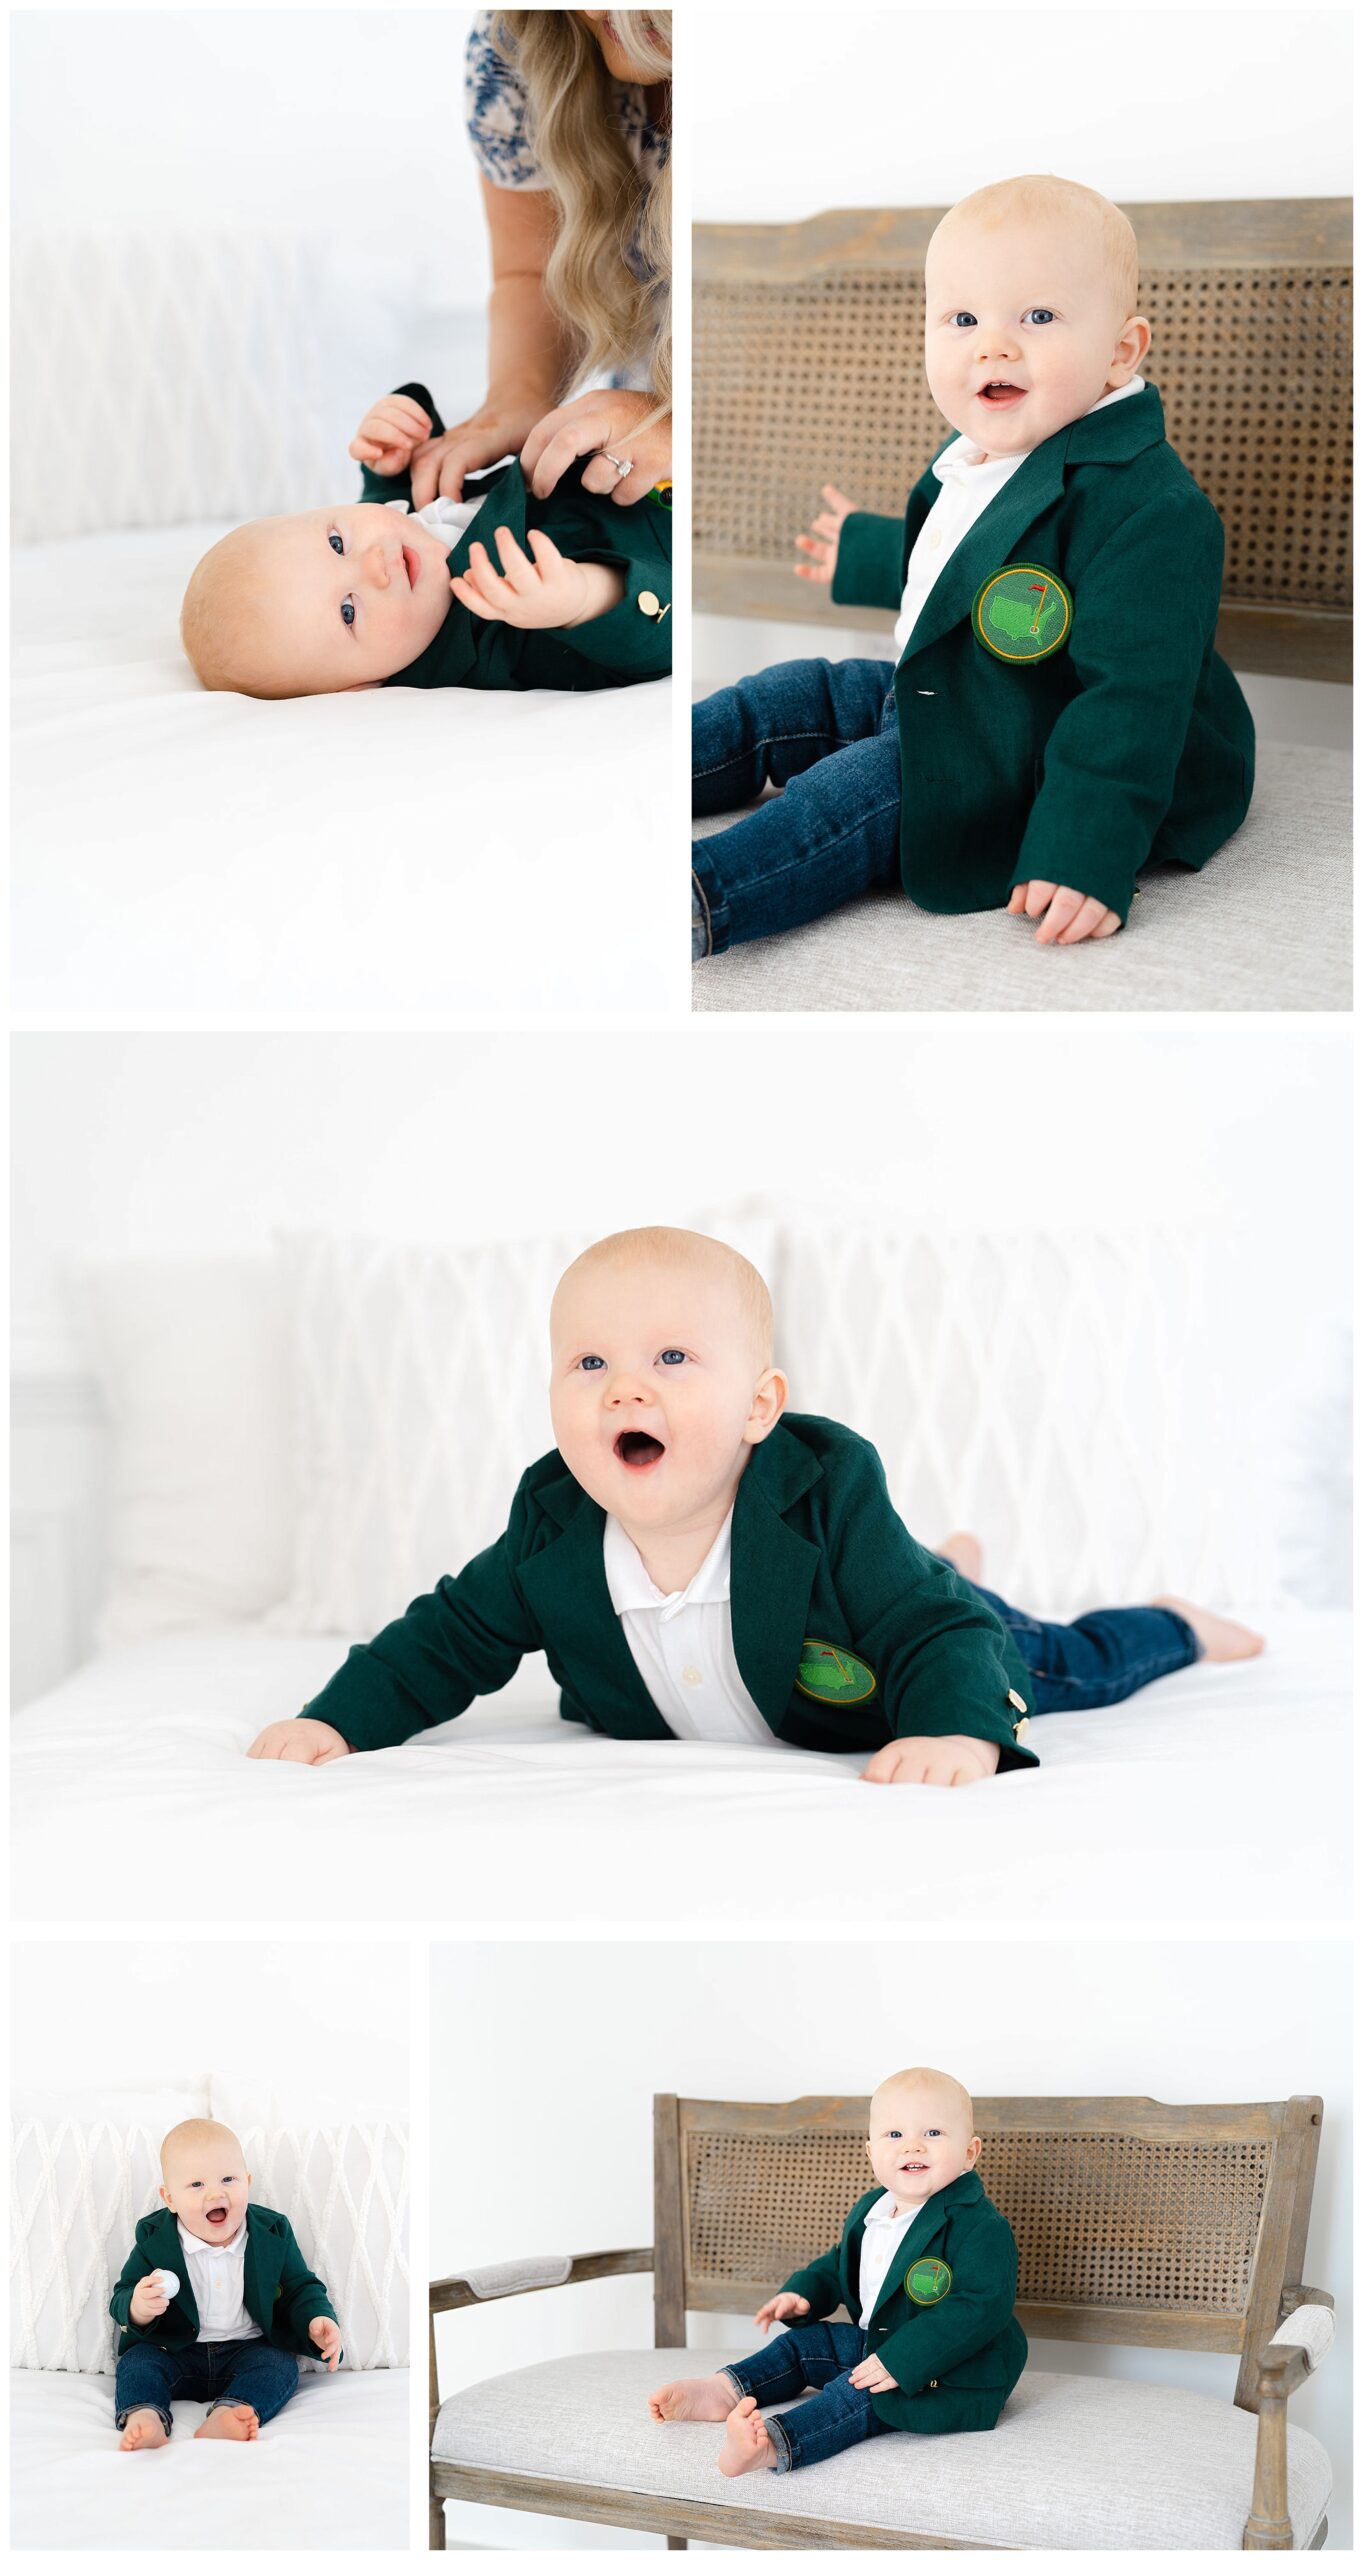 Baby in Master jacket on bench and bad at Atlanta Milestone Photo Session in Marietta Studio by Lindsey Powell Photography